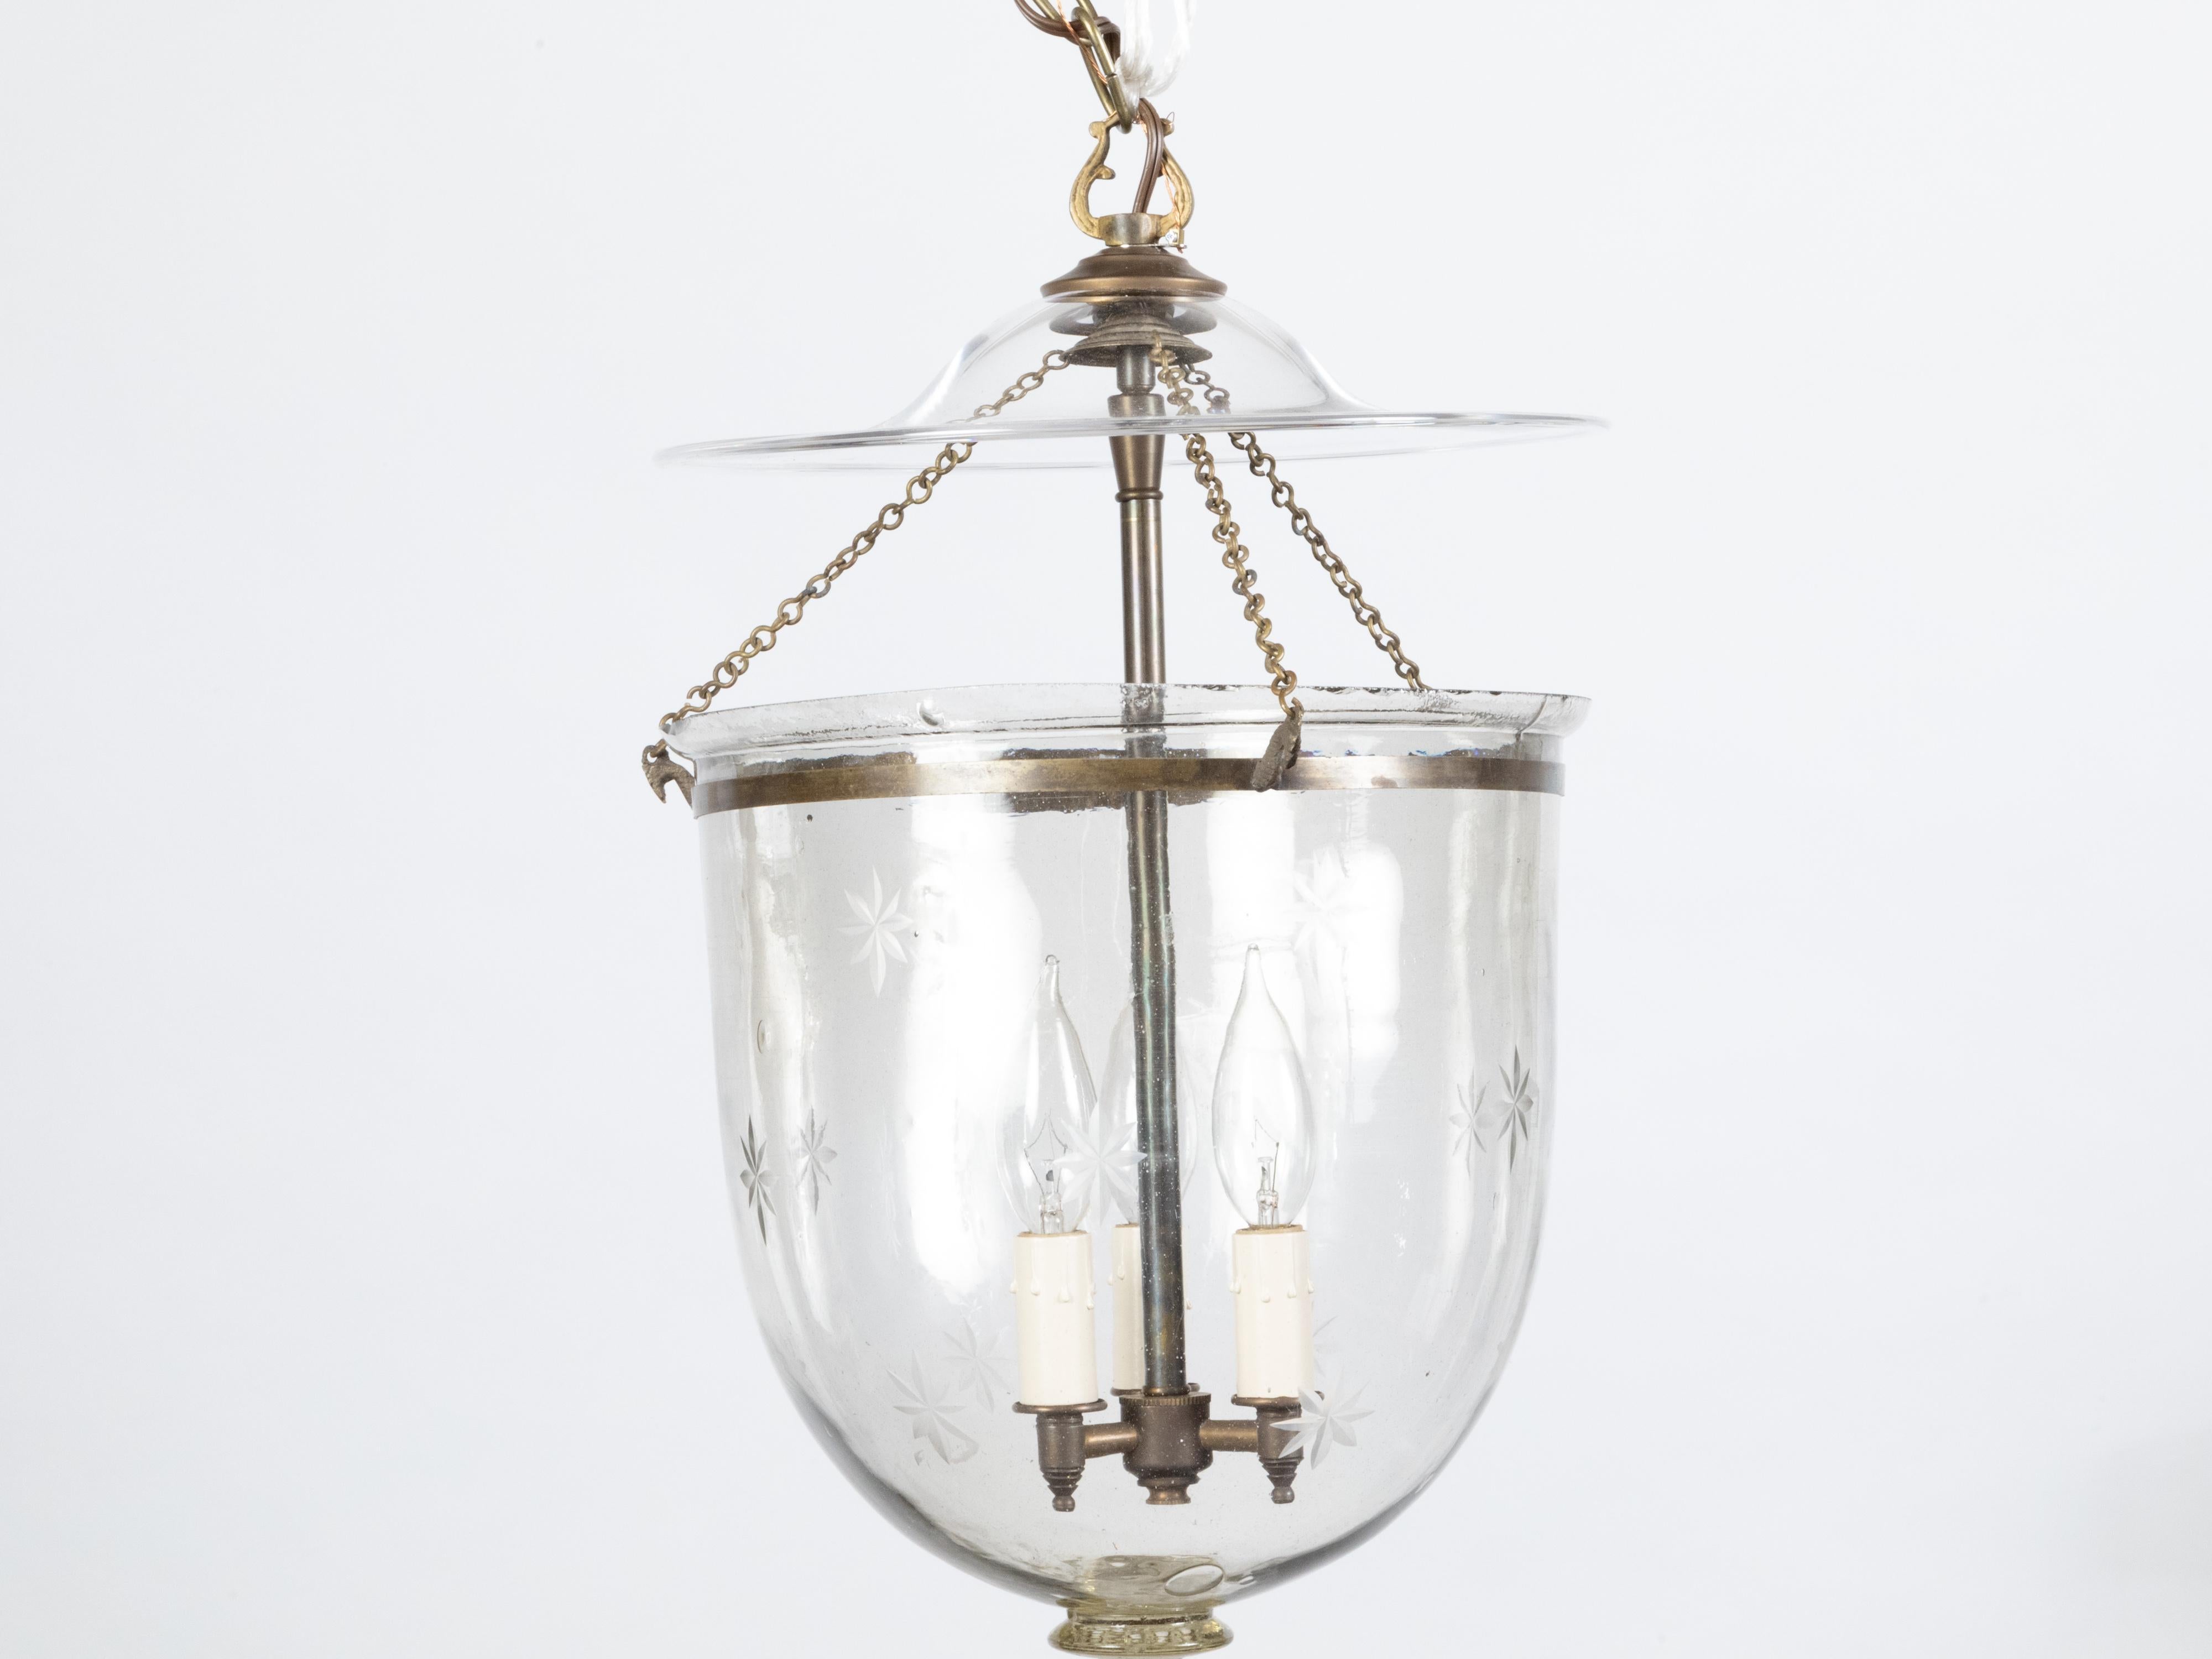 English 1900s Turn of the Century Bell Jar Light Fixture with Etched Stars In Good Condition For Sale In Atlanta, GA